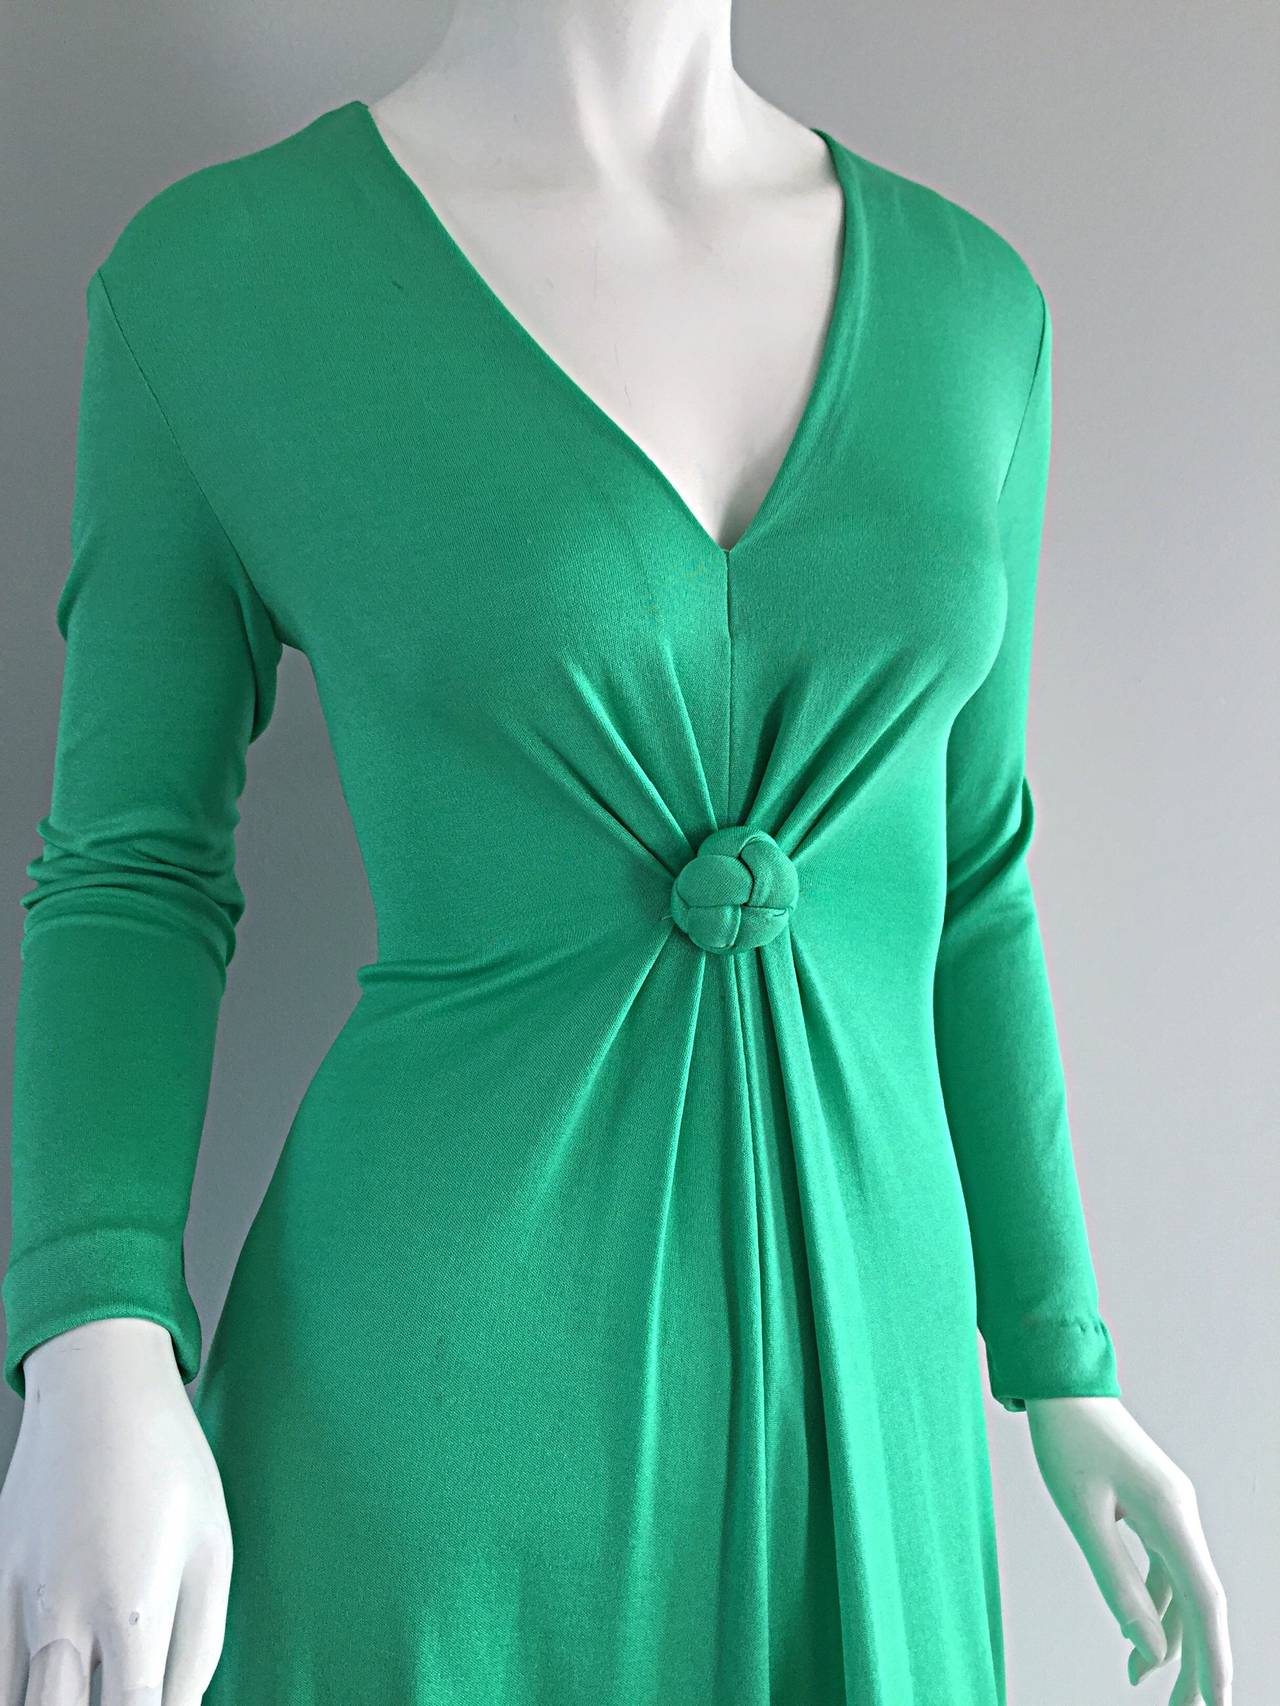 Very rare early 1970s Frederick's of Hollywood kelly green maxi dress! Slimming fit, with sleek long sleeves, and superb v-neck bust. Knotted detail at waist. Such a stunning dress, that can easily be taken from day to night. Zips up the back. Looks